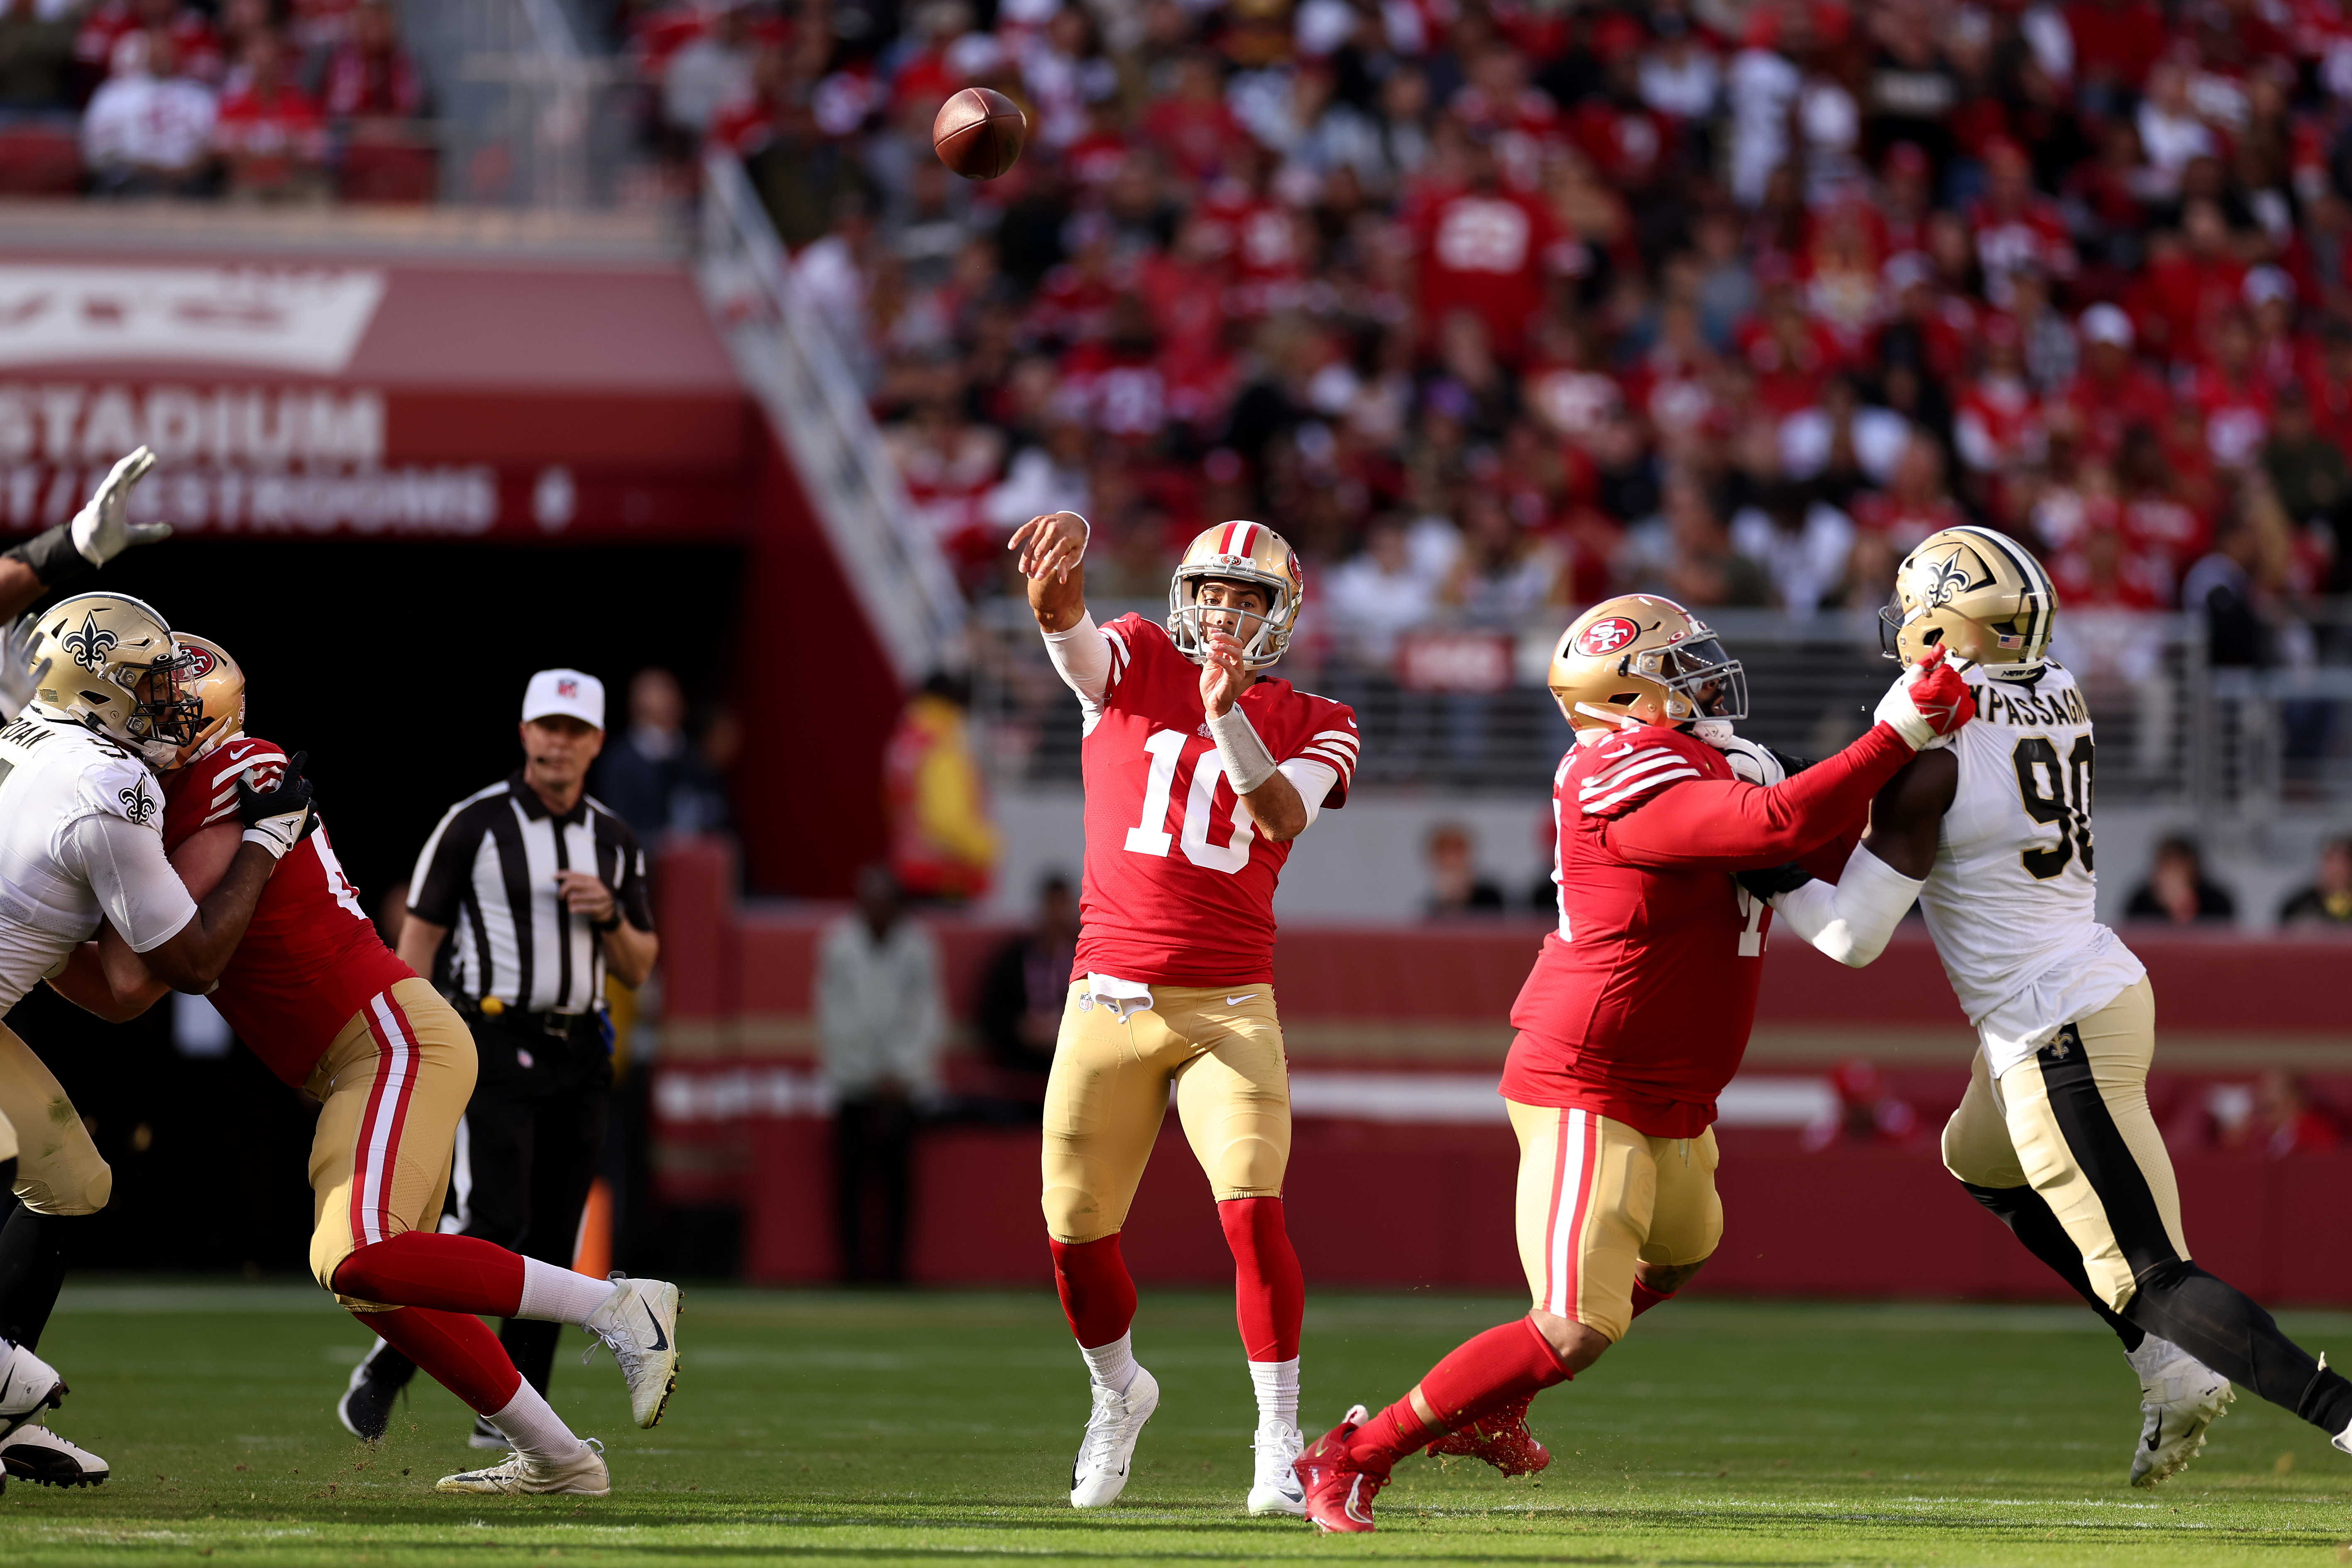 Quarterback Jimmy Garoppolo (#10) of the San Francisco 49ers passes in the game against the New Orleans Saints at Levis Stadium in Santa Clara, California, November 27, 2022. /CFP